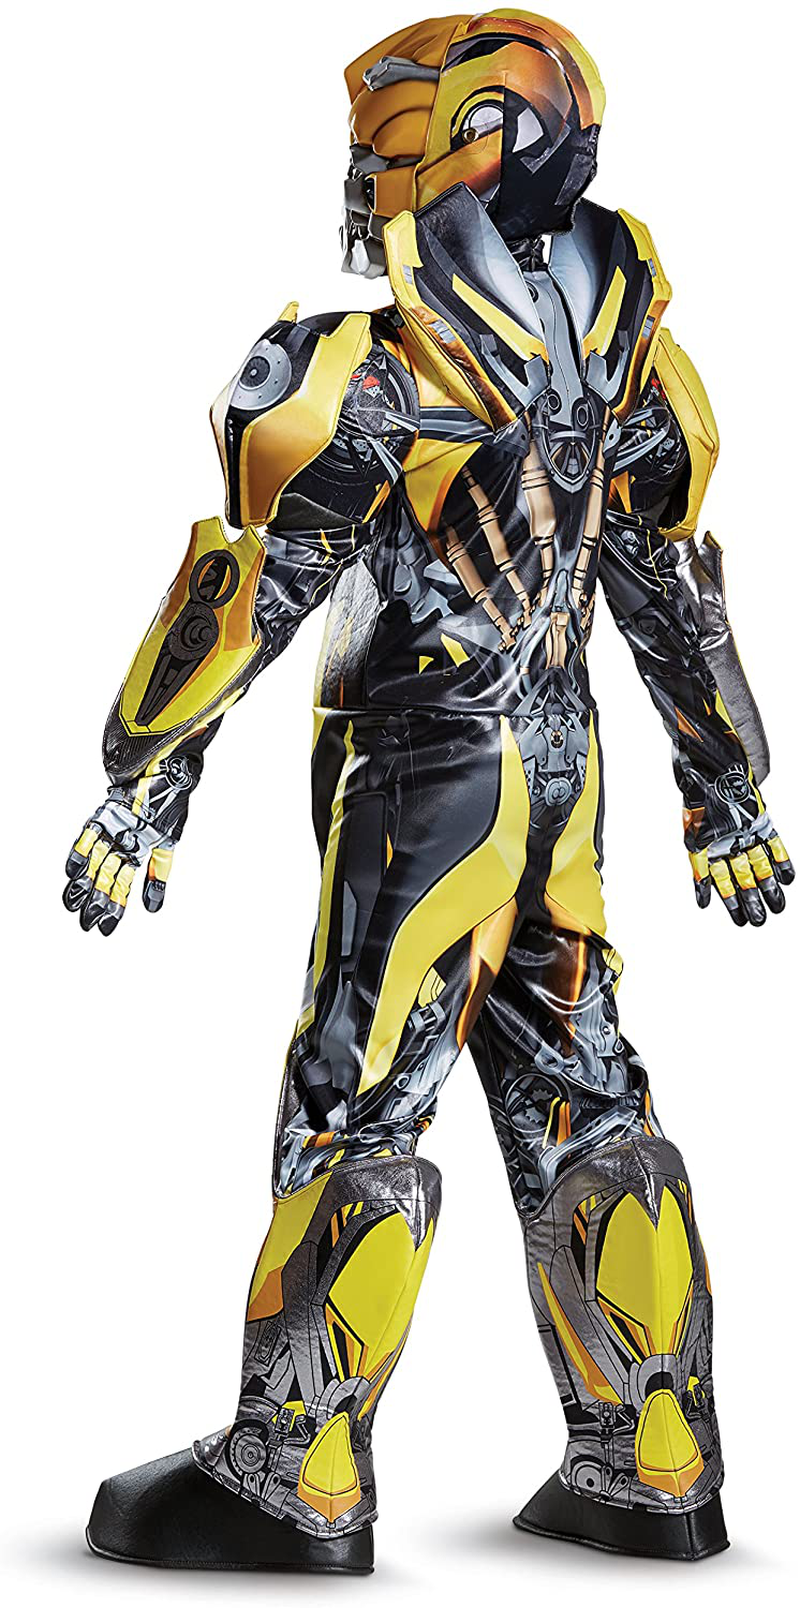 Disguise Bumblebee Movie Prestige Costume, Yellow, Medium (7-8) Apparel & Accessories > Costumes & Accessories > Costumes Disguise   